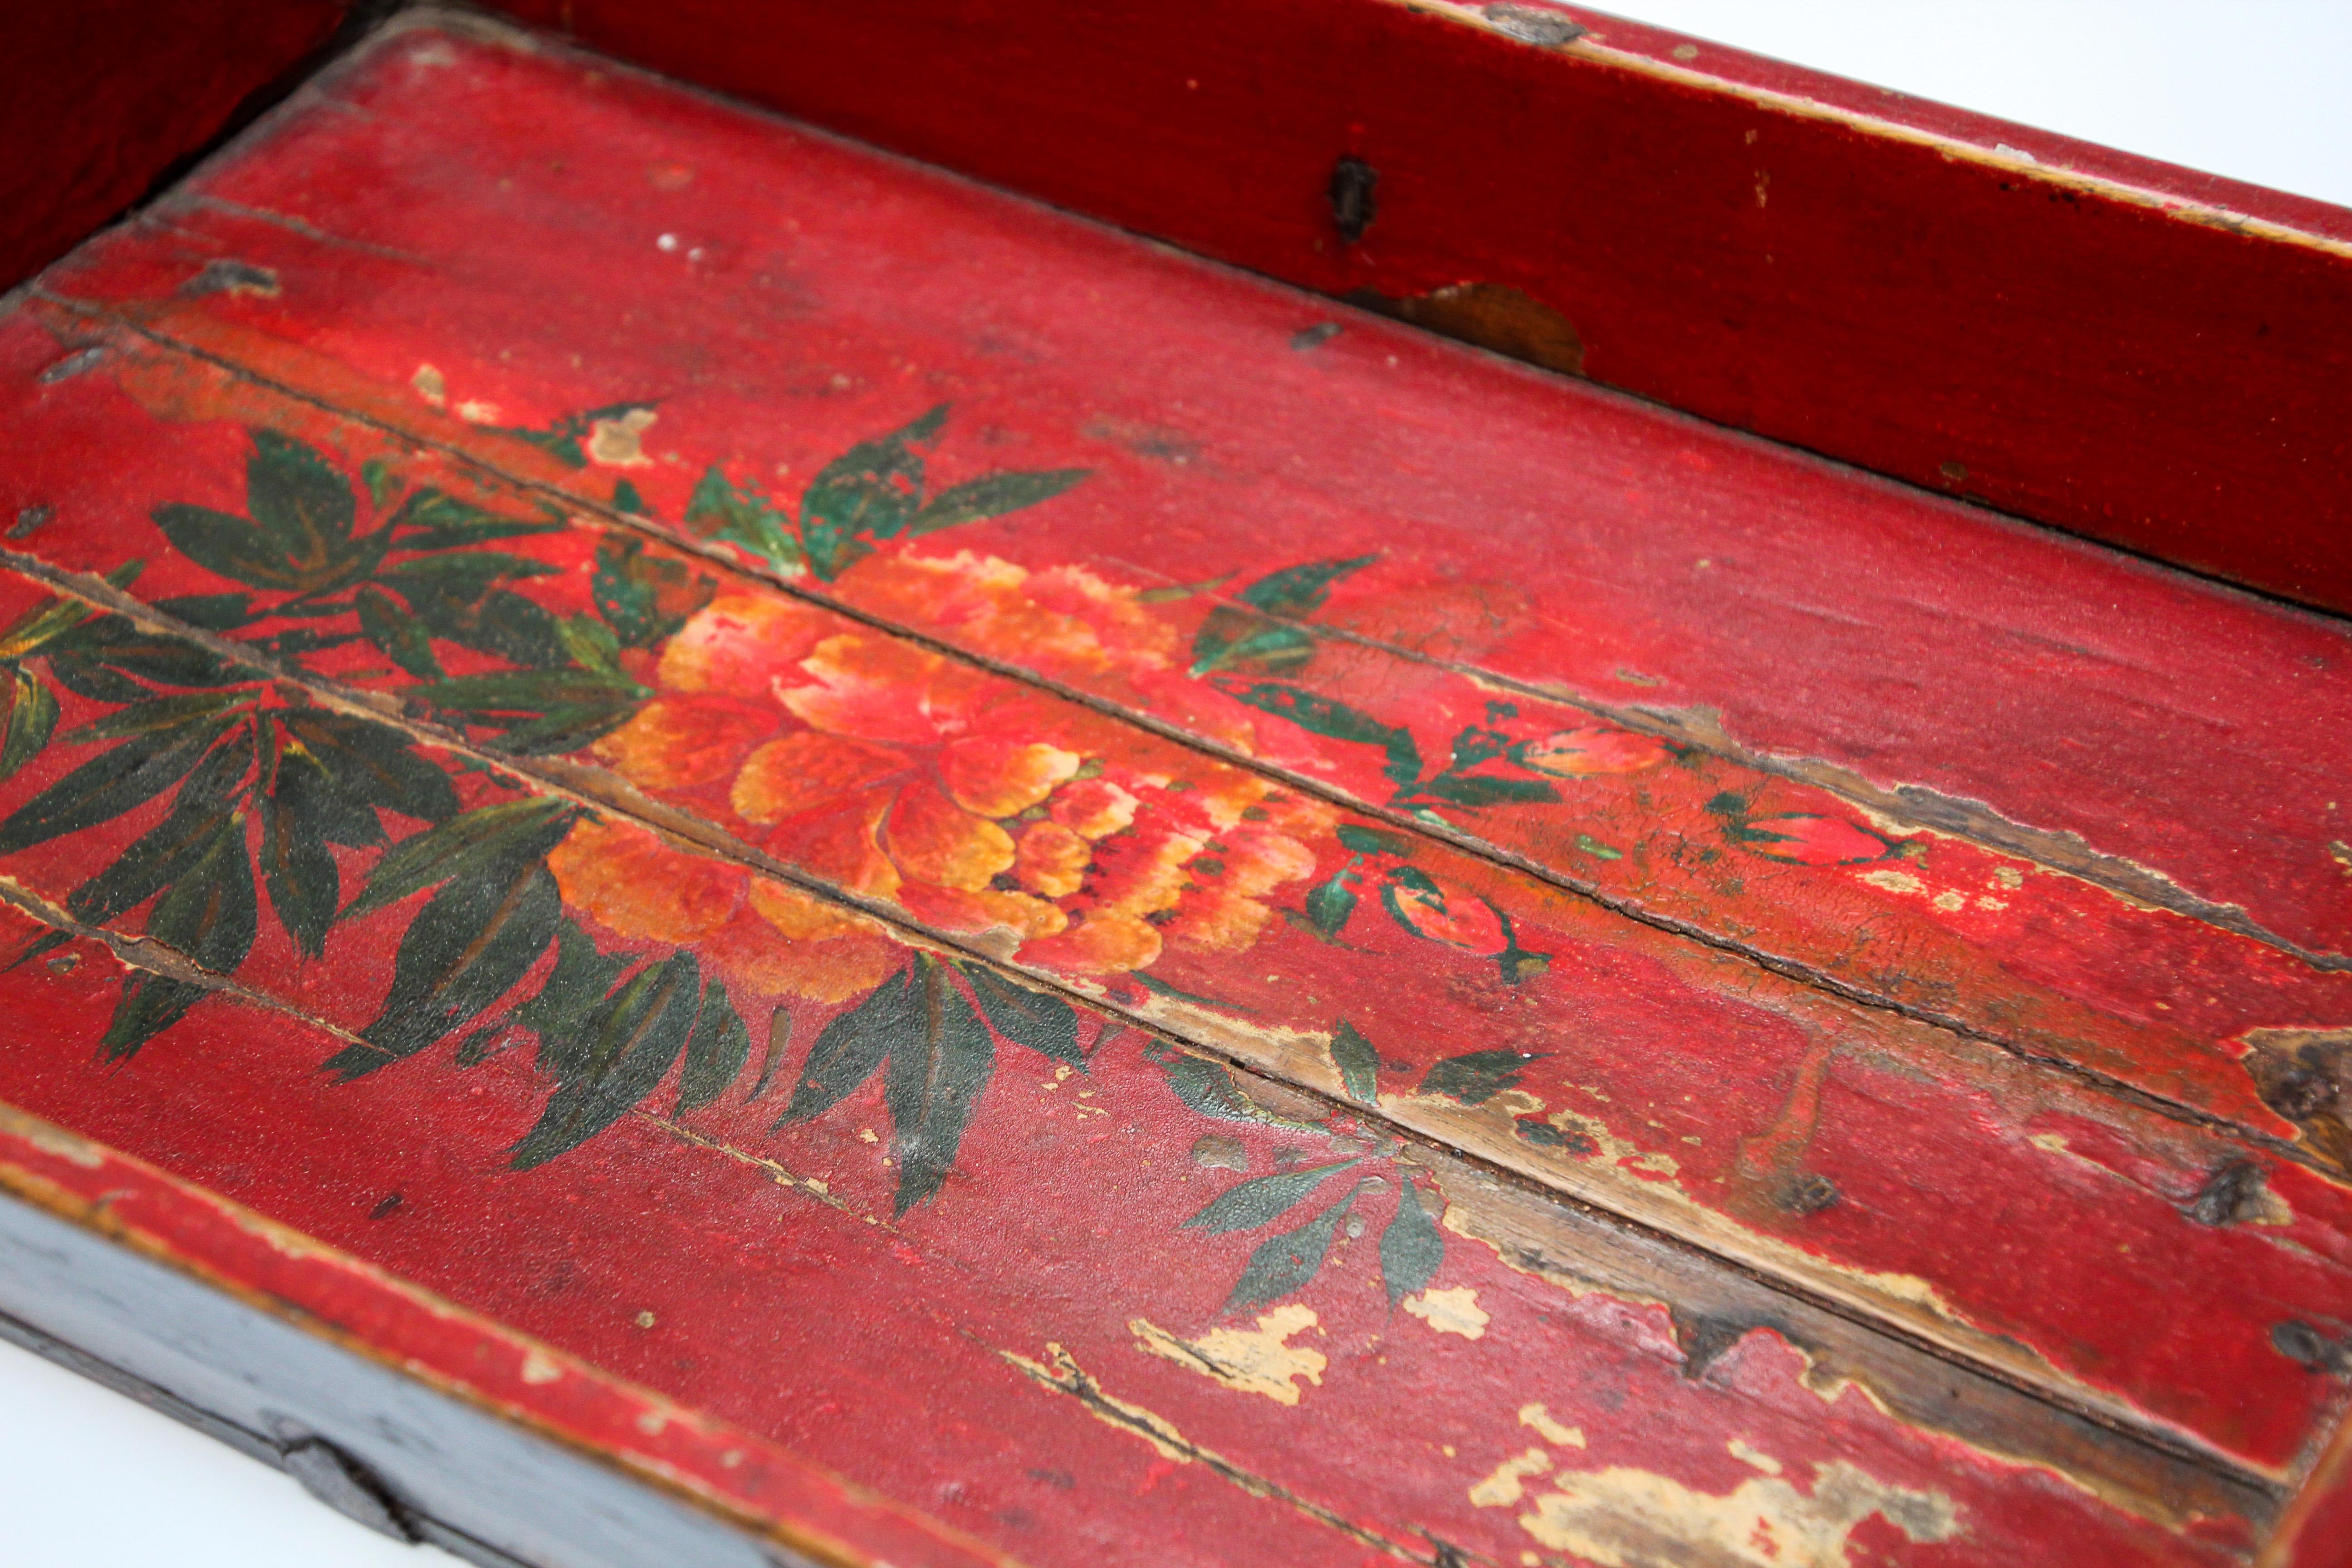 Late 19th century antique wood serving tray hand painted with flowers on red background.
Worn paint and great patina with floral painted design in red and yellow and green.
Well constructed and still strong and useful.
Lipped edges and wooden peg